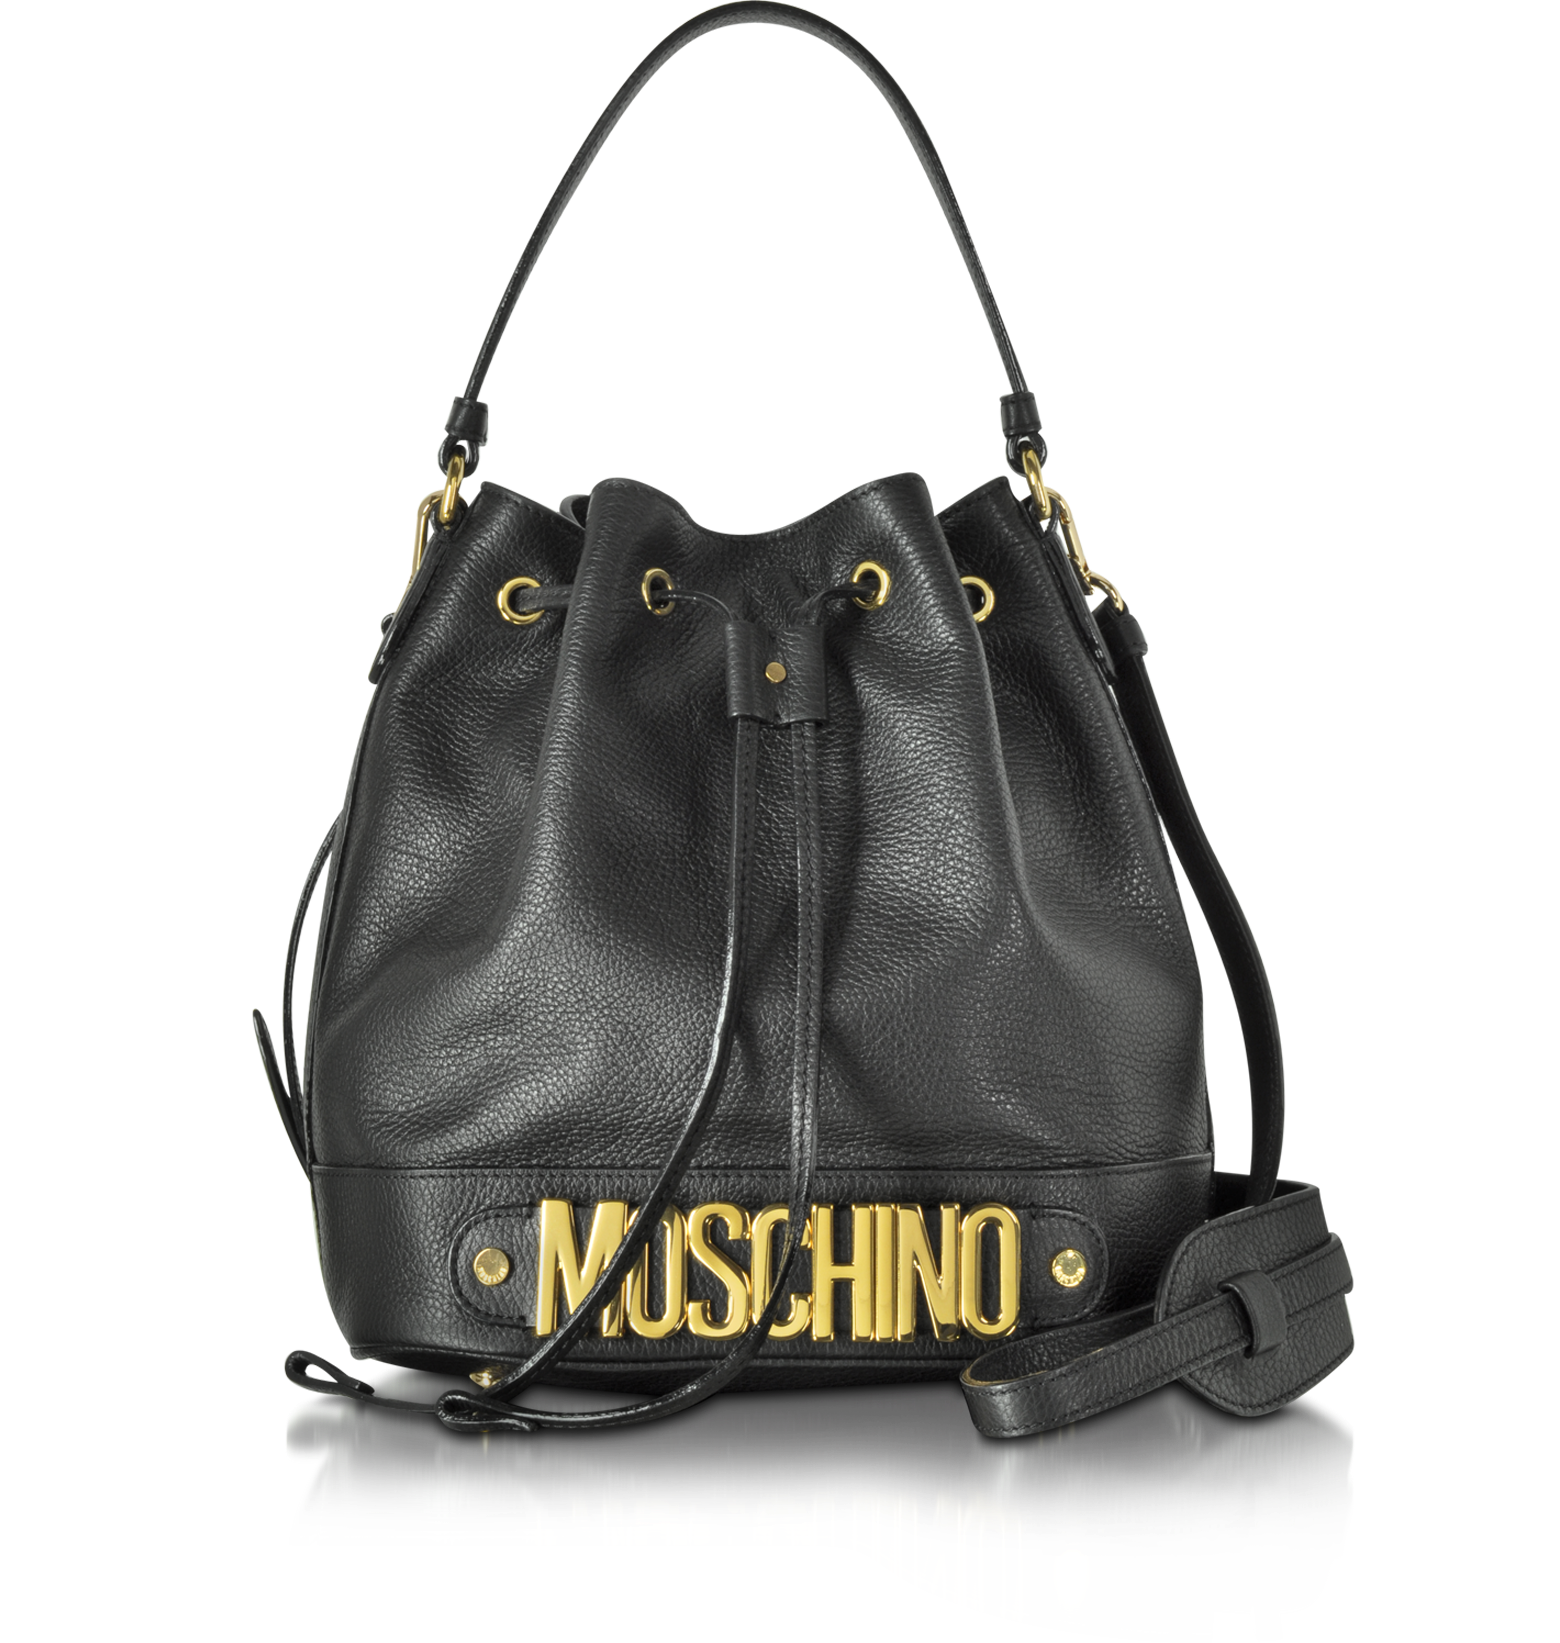 Moschino Black Leather Bucket Bag at 